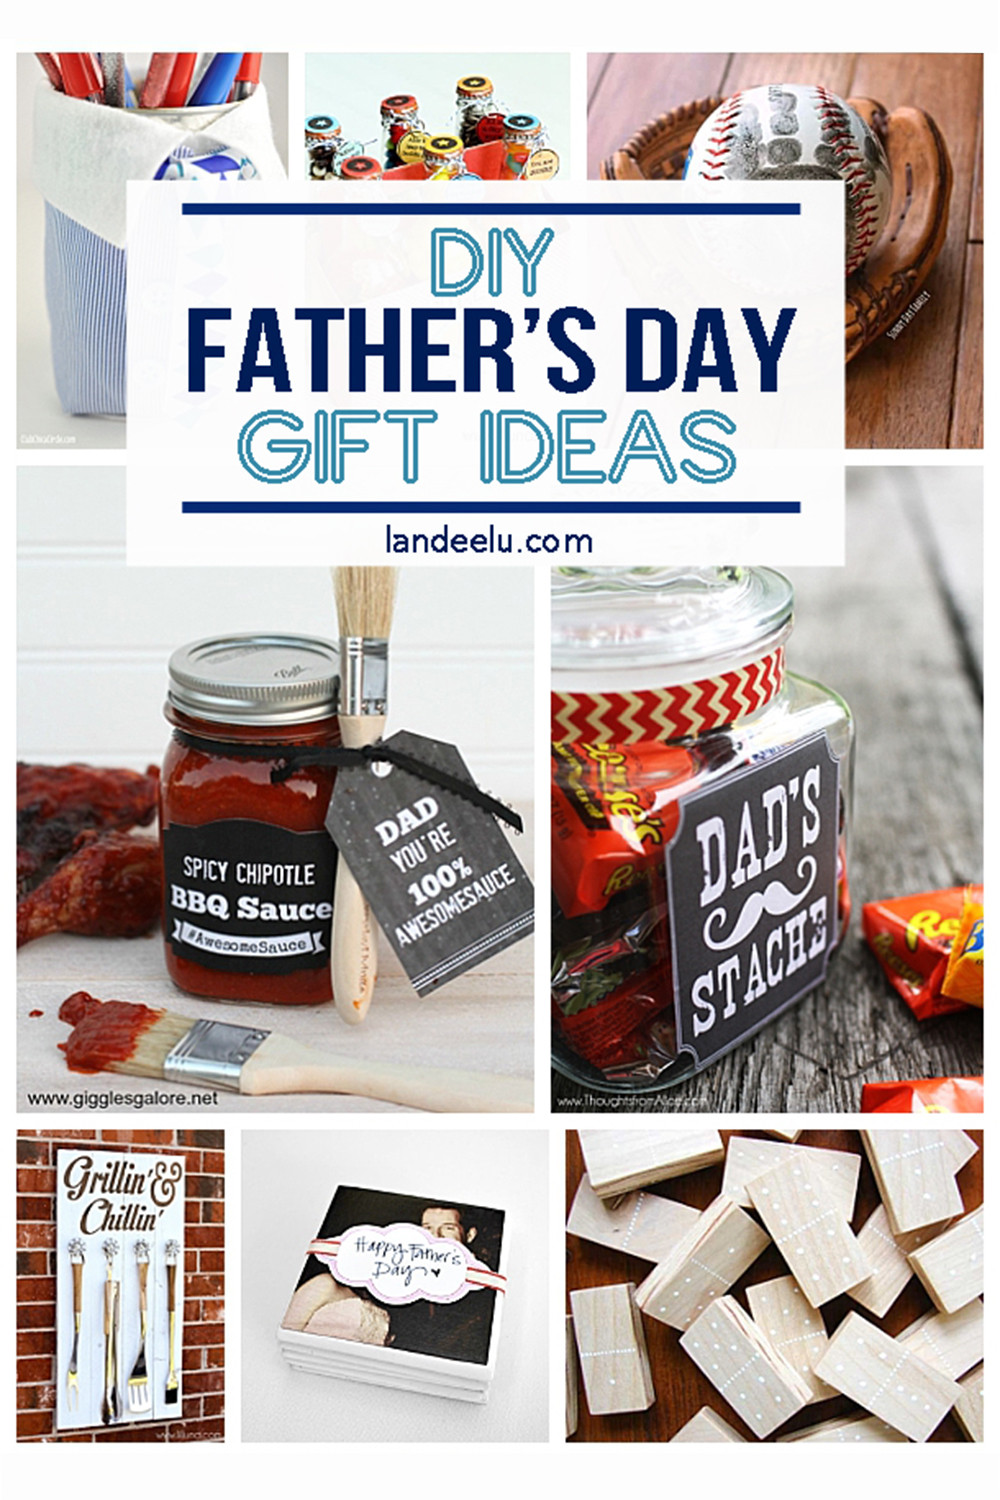 Popular Fathers Day Gifts
 21 DIY Father s Day Gifts to Celebrate Dad landeelu